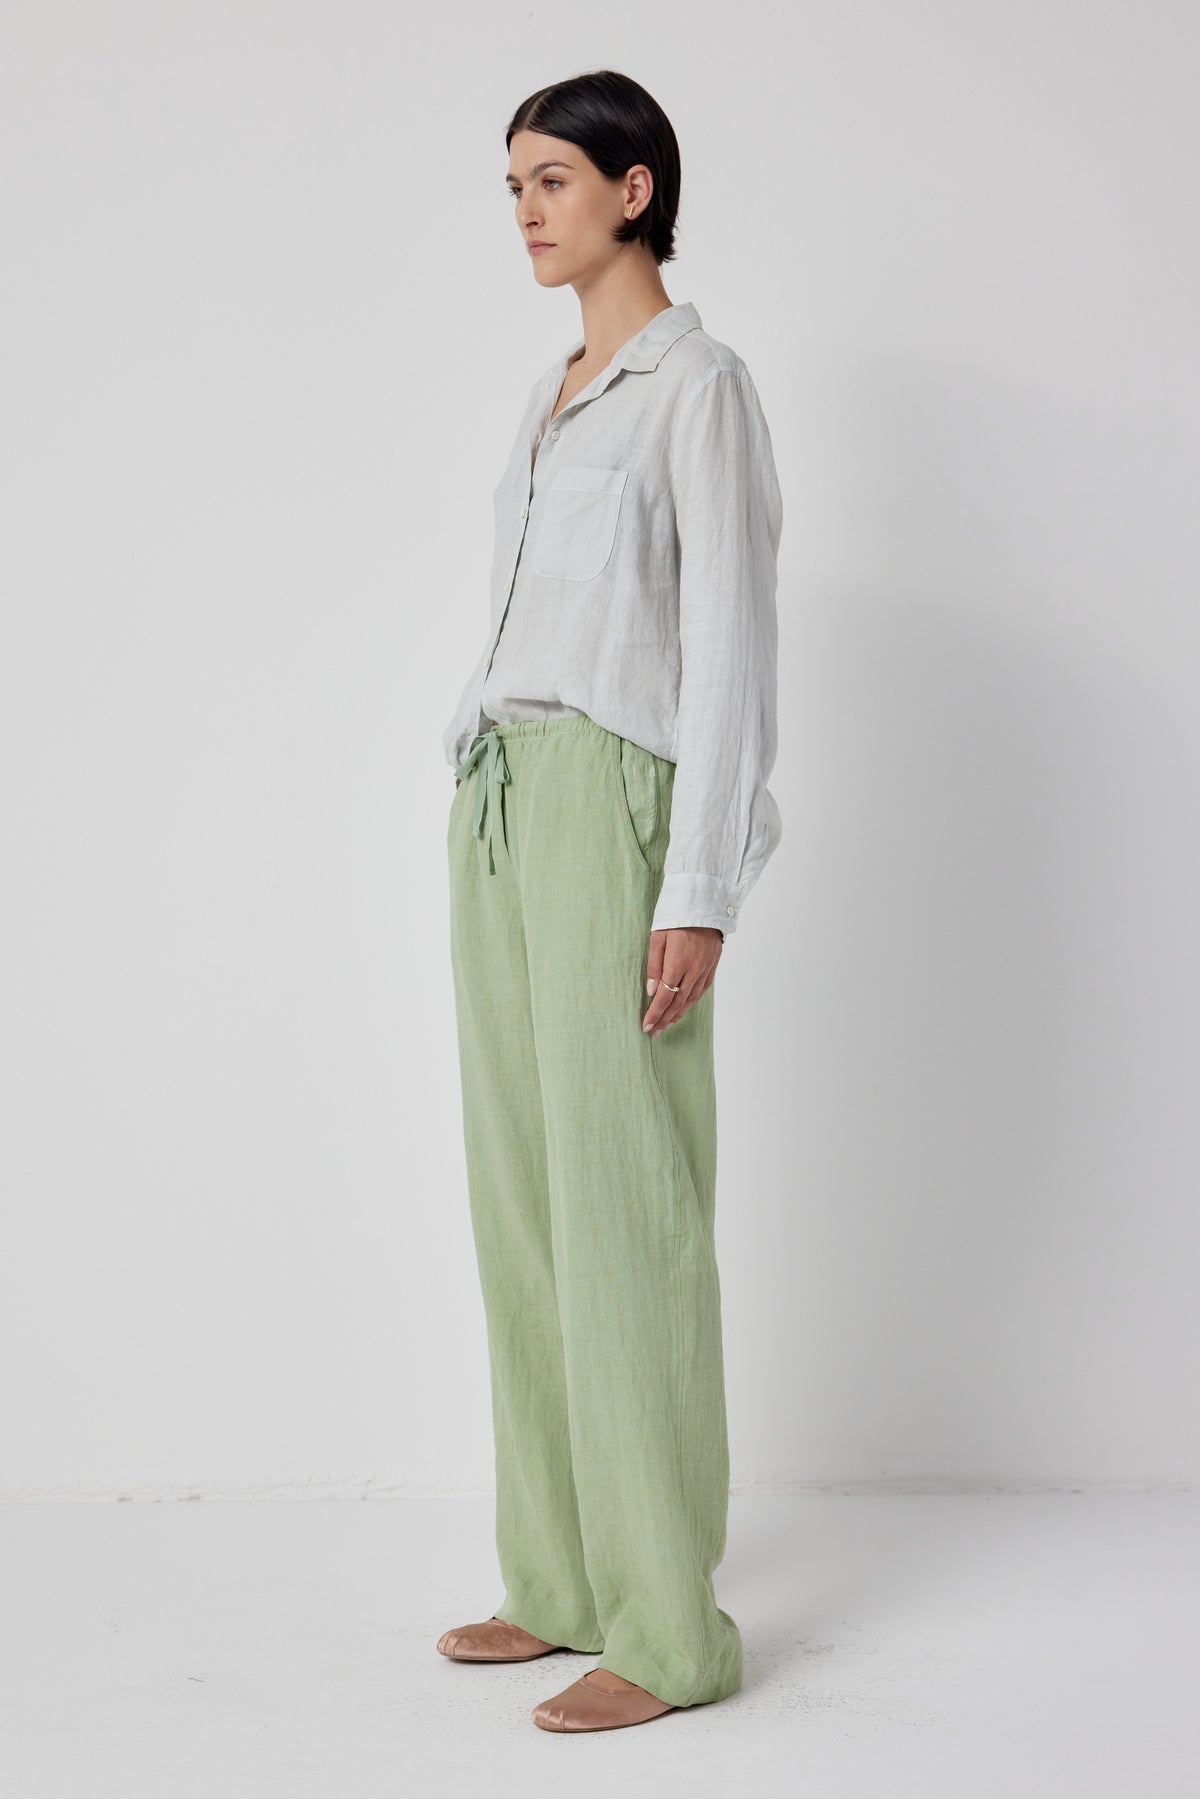   Woman wearing a casual white shirt and PICO PANT by Velvet by Jenny Graham, standing against a plain background. 